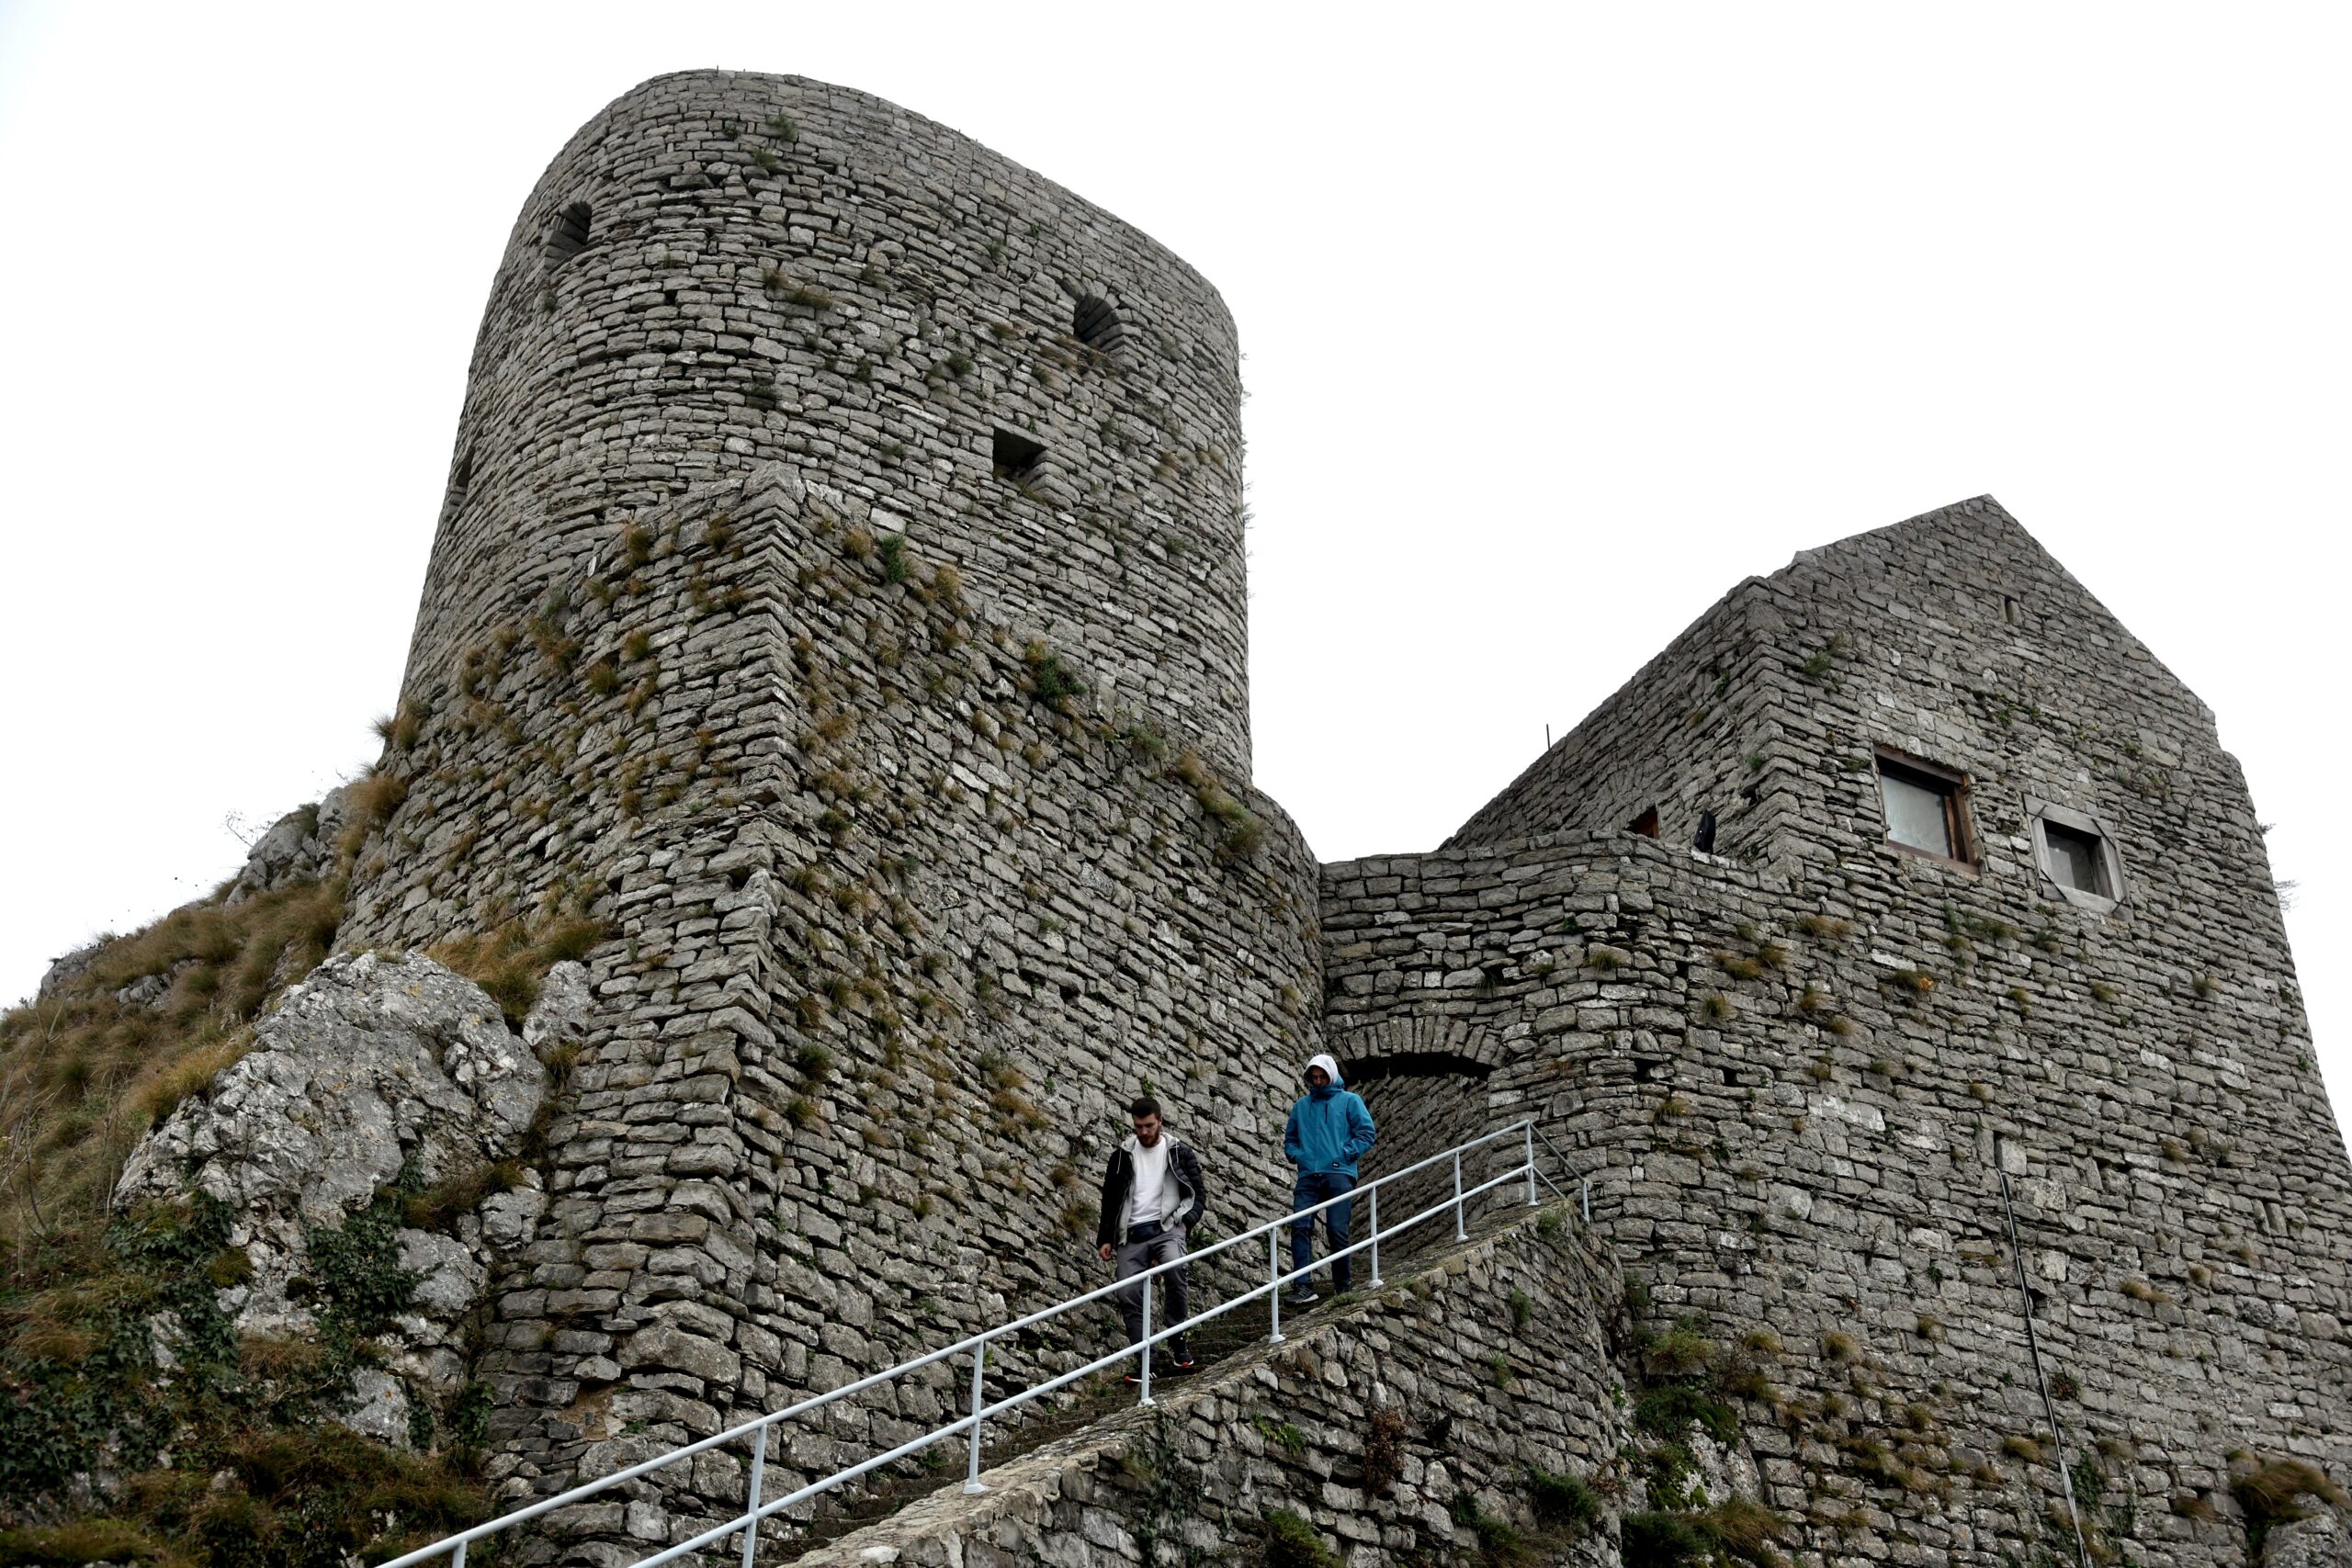 Inforegio - Unleashing the tourism potential of historical fortresses in  the western Balkans